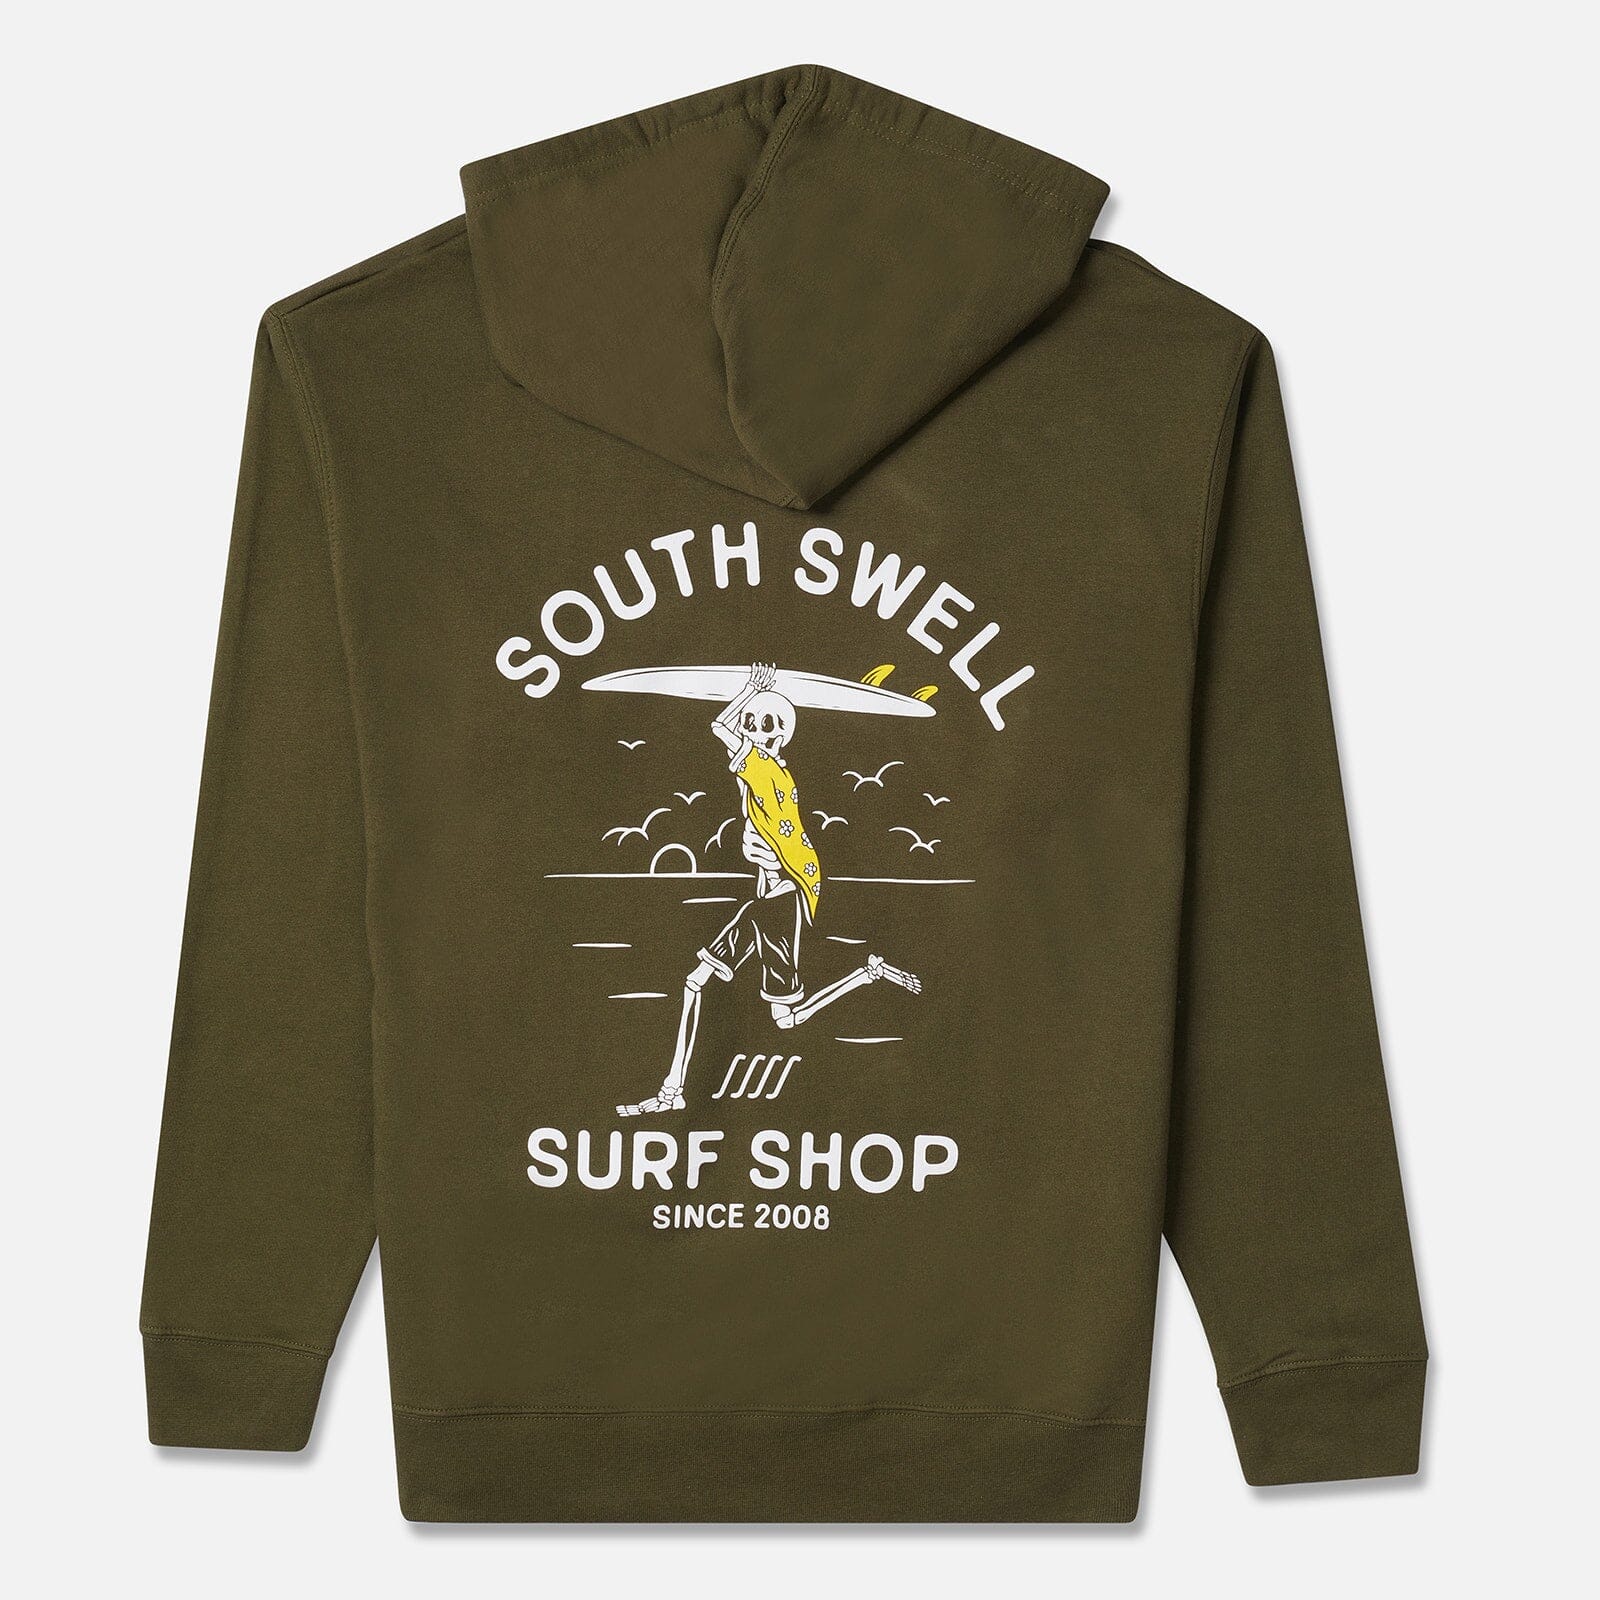 South Swell Shred Til Dead Hoodie